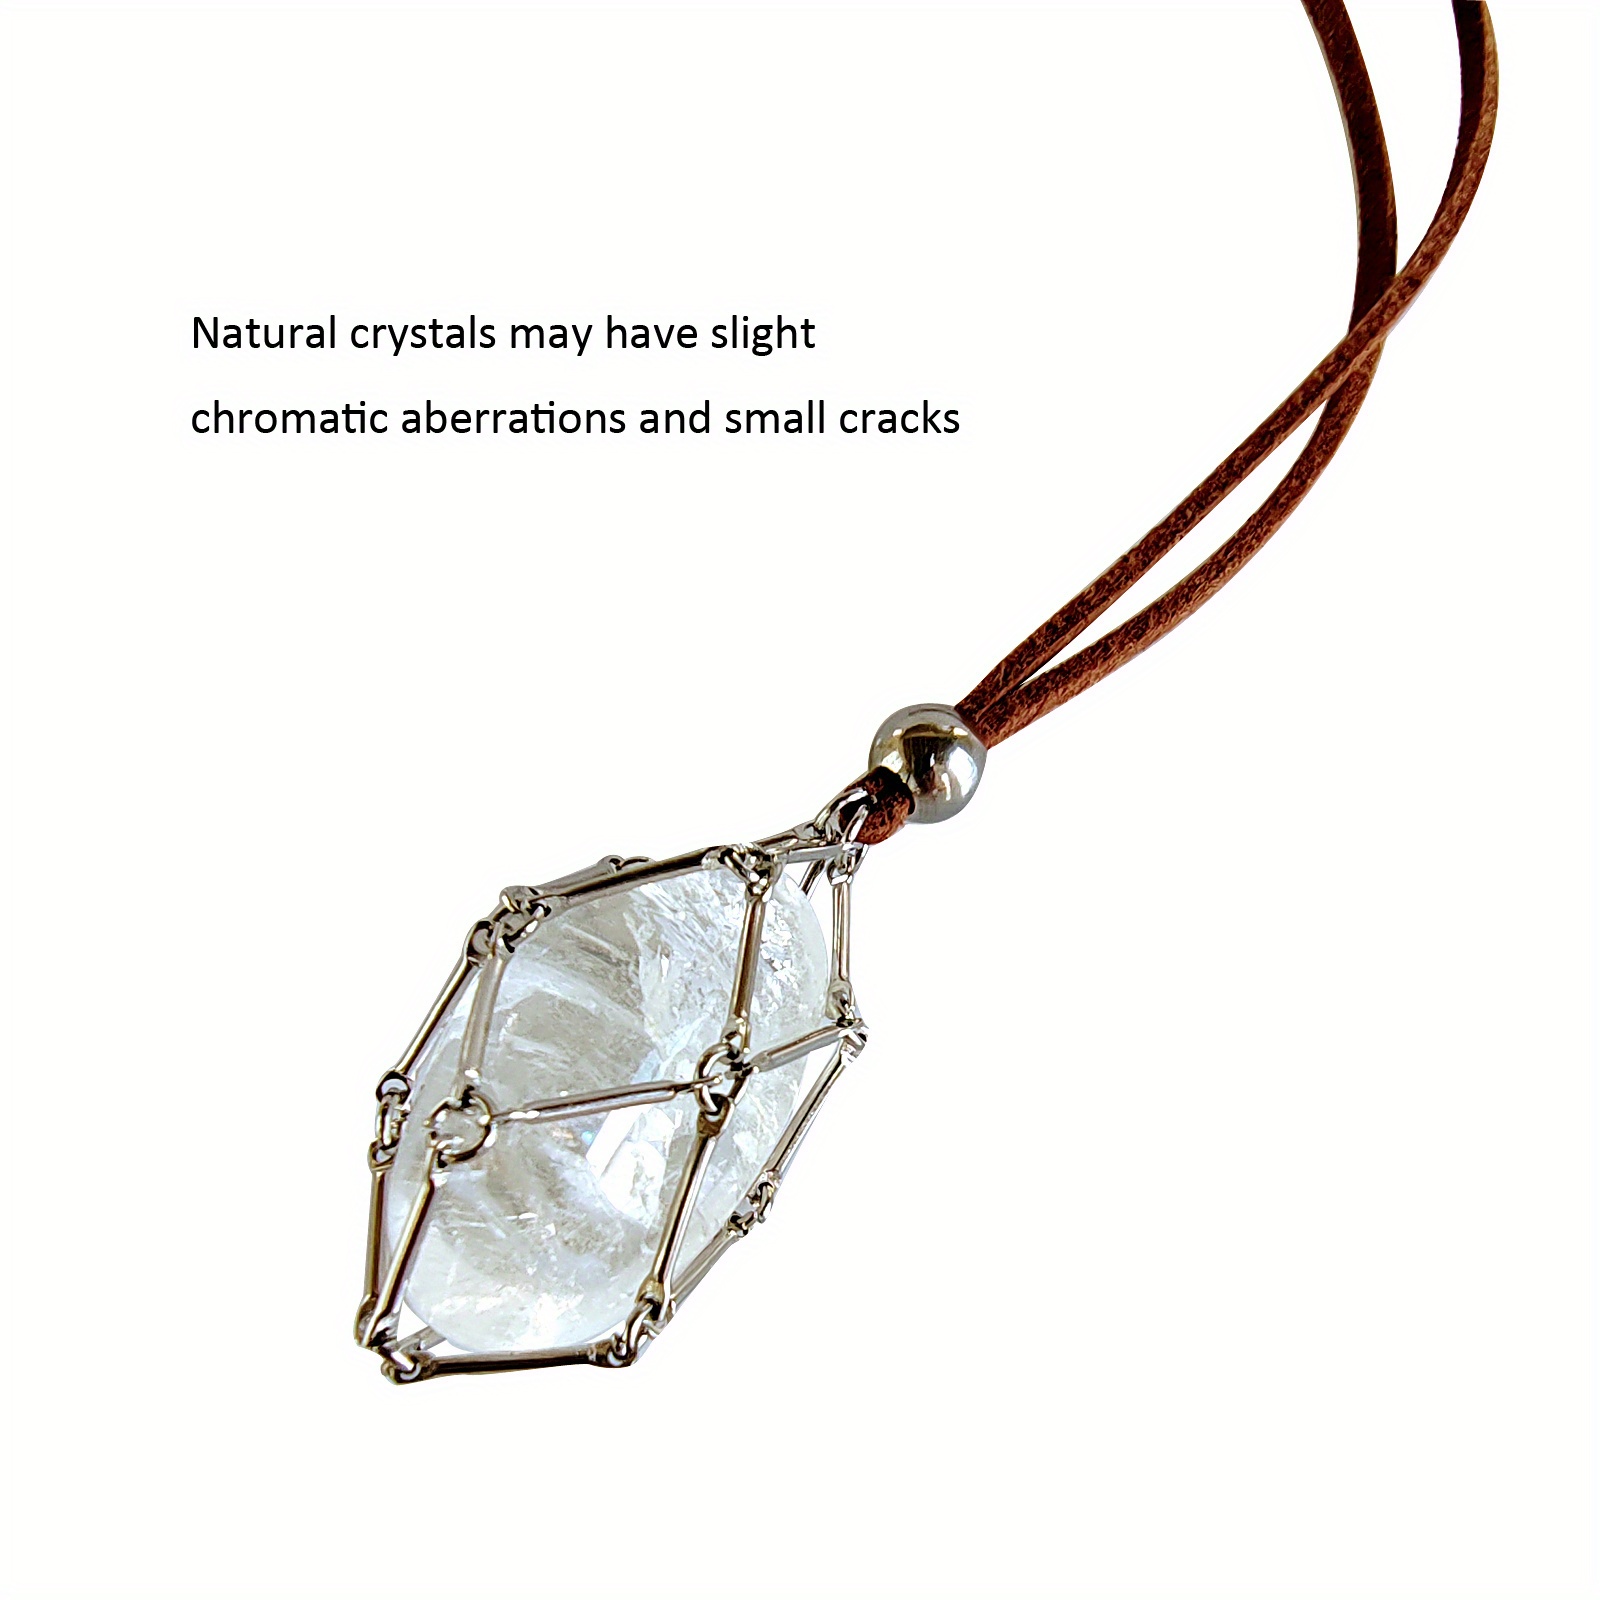 Anjiucc Handmade Crystal Holder Necklace - Stainless Steel Cage